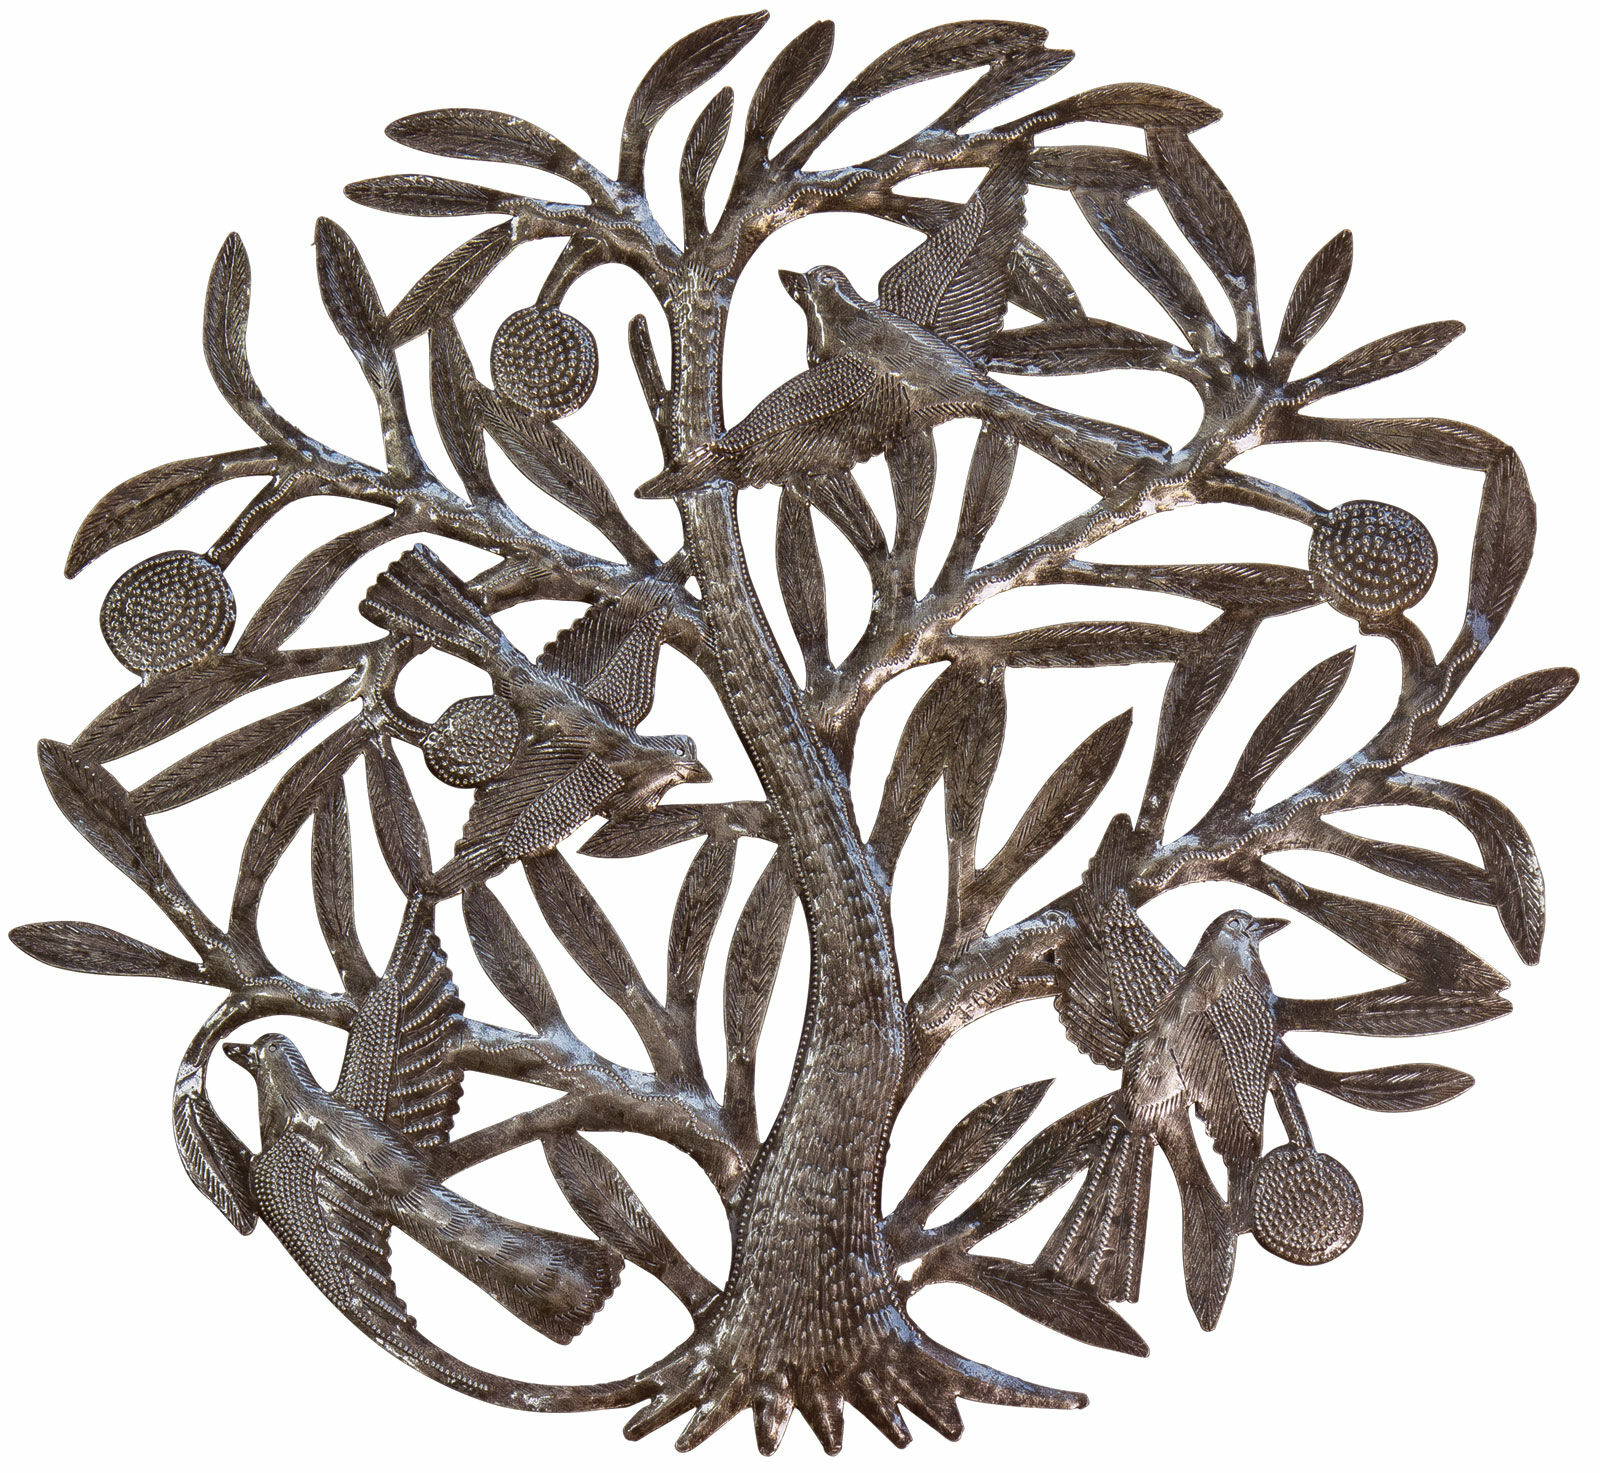 Wall object "Les Oiseaux", iron by Rony